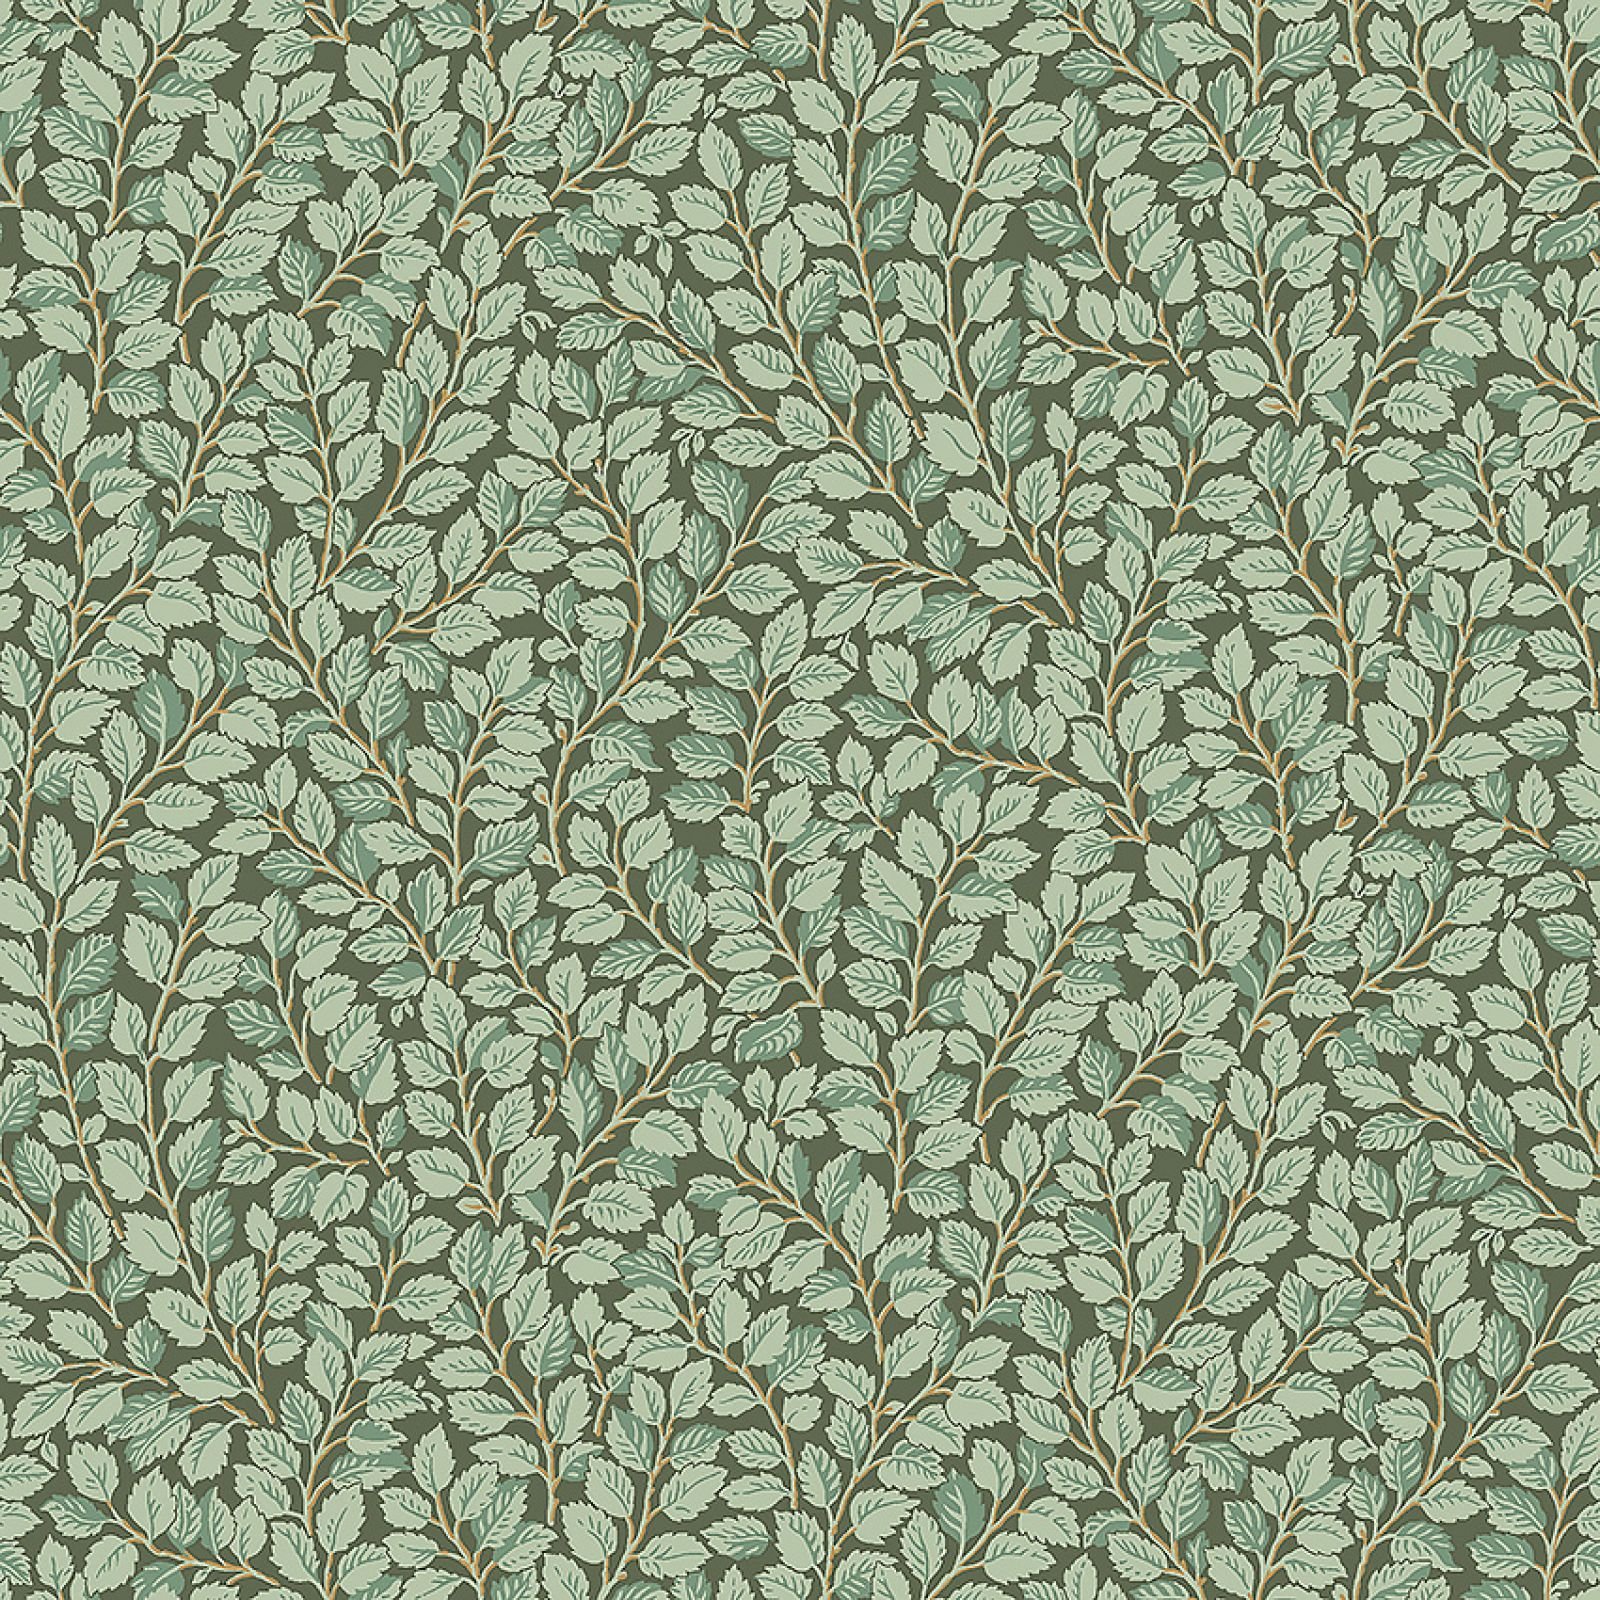 Hazel wallpaper with a choice of dark green or light green colourways